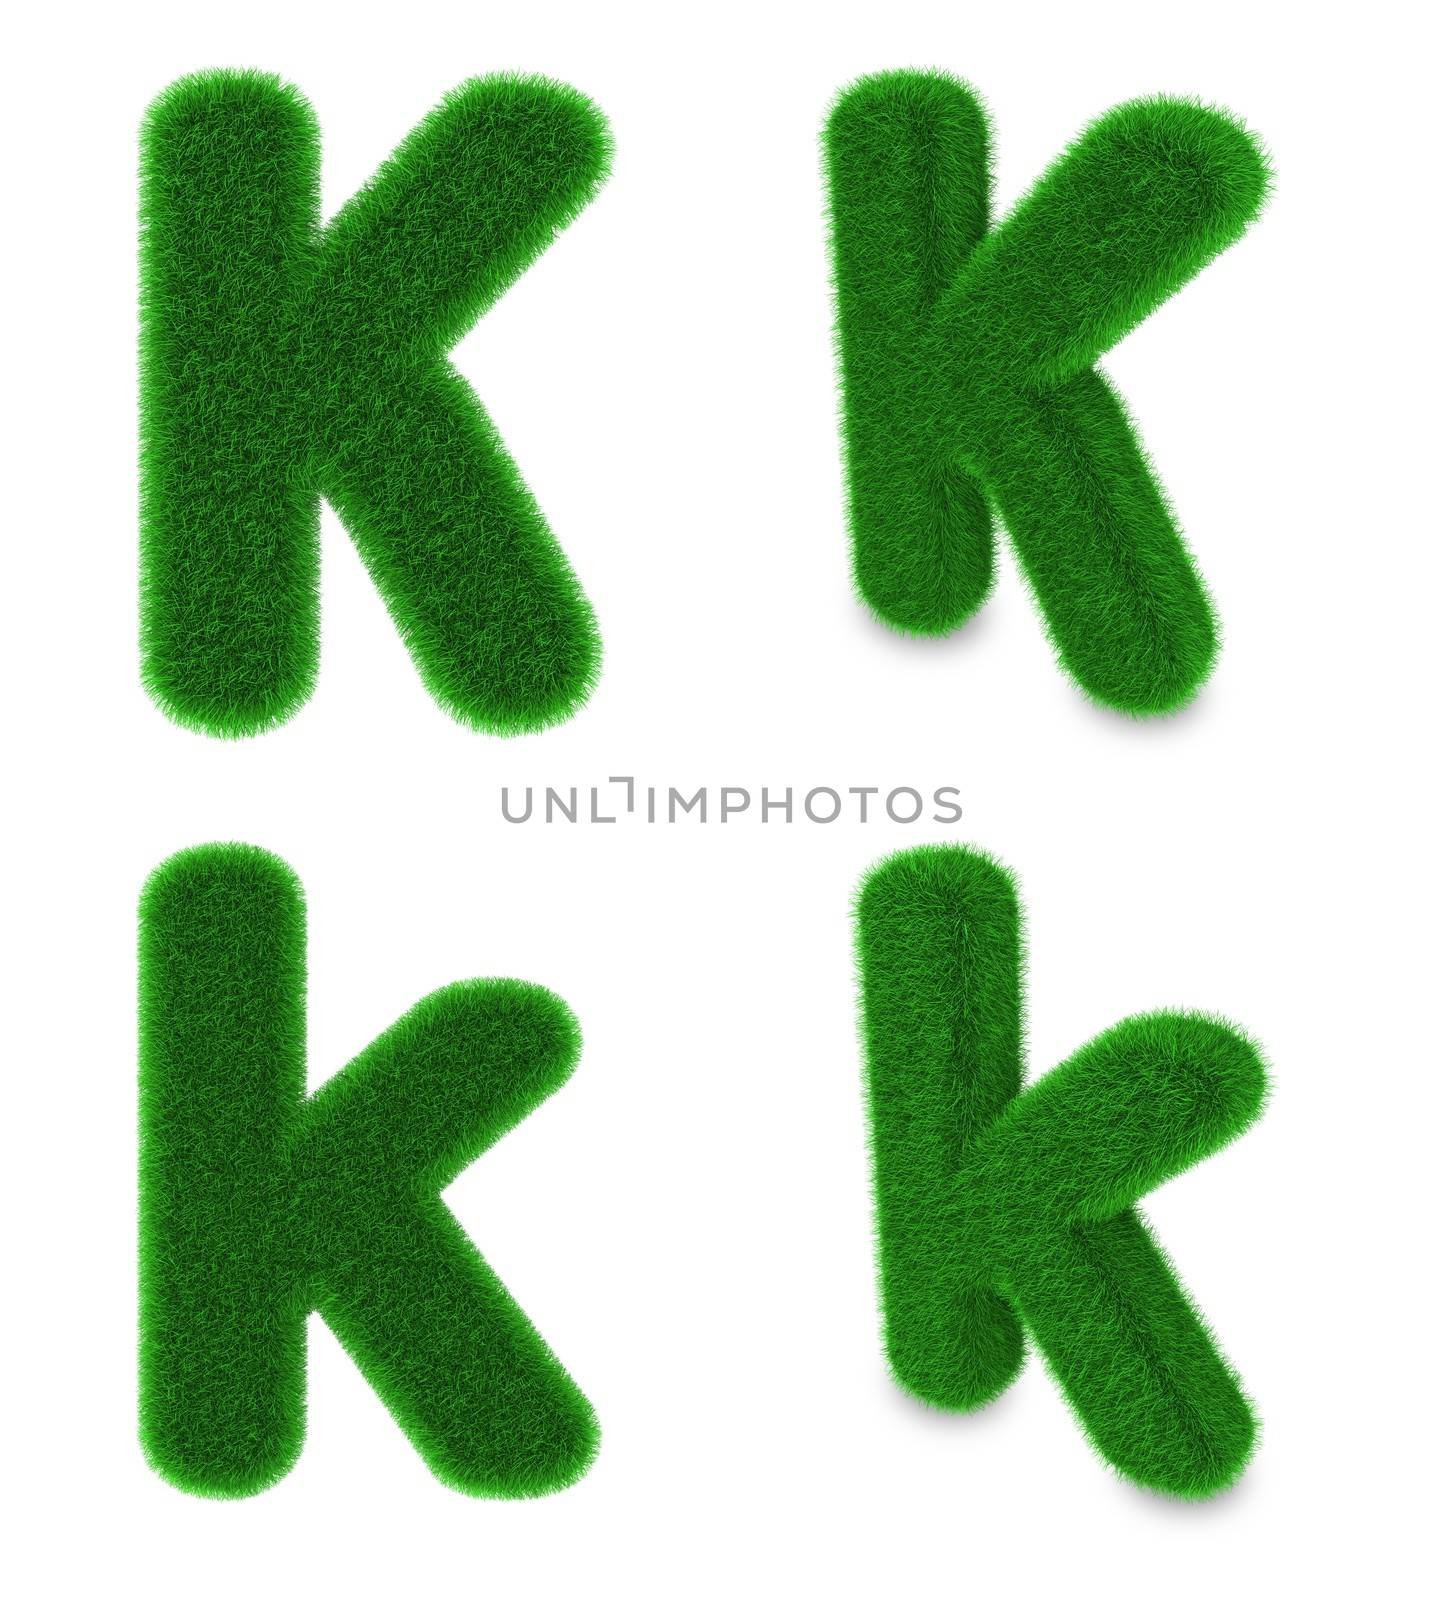 Letter K covered by green grass isolated on white background